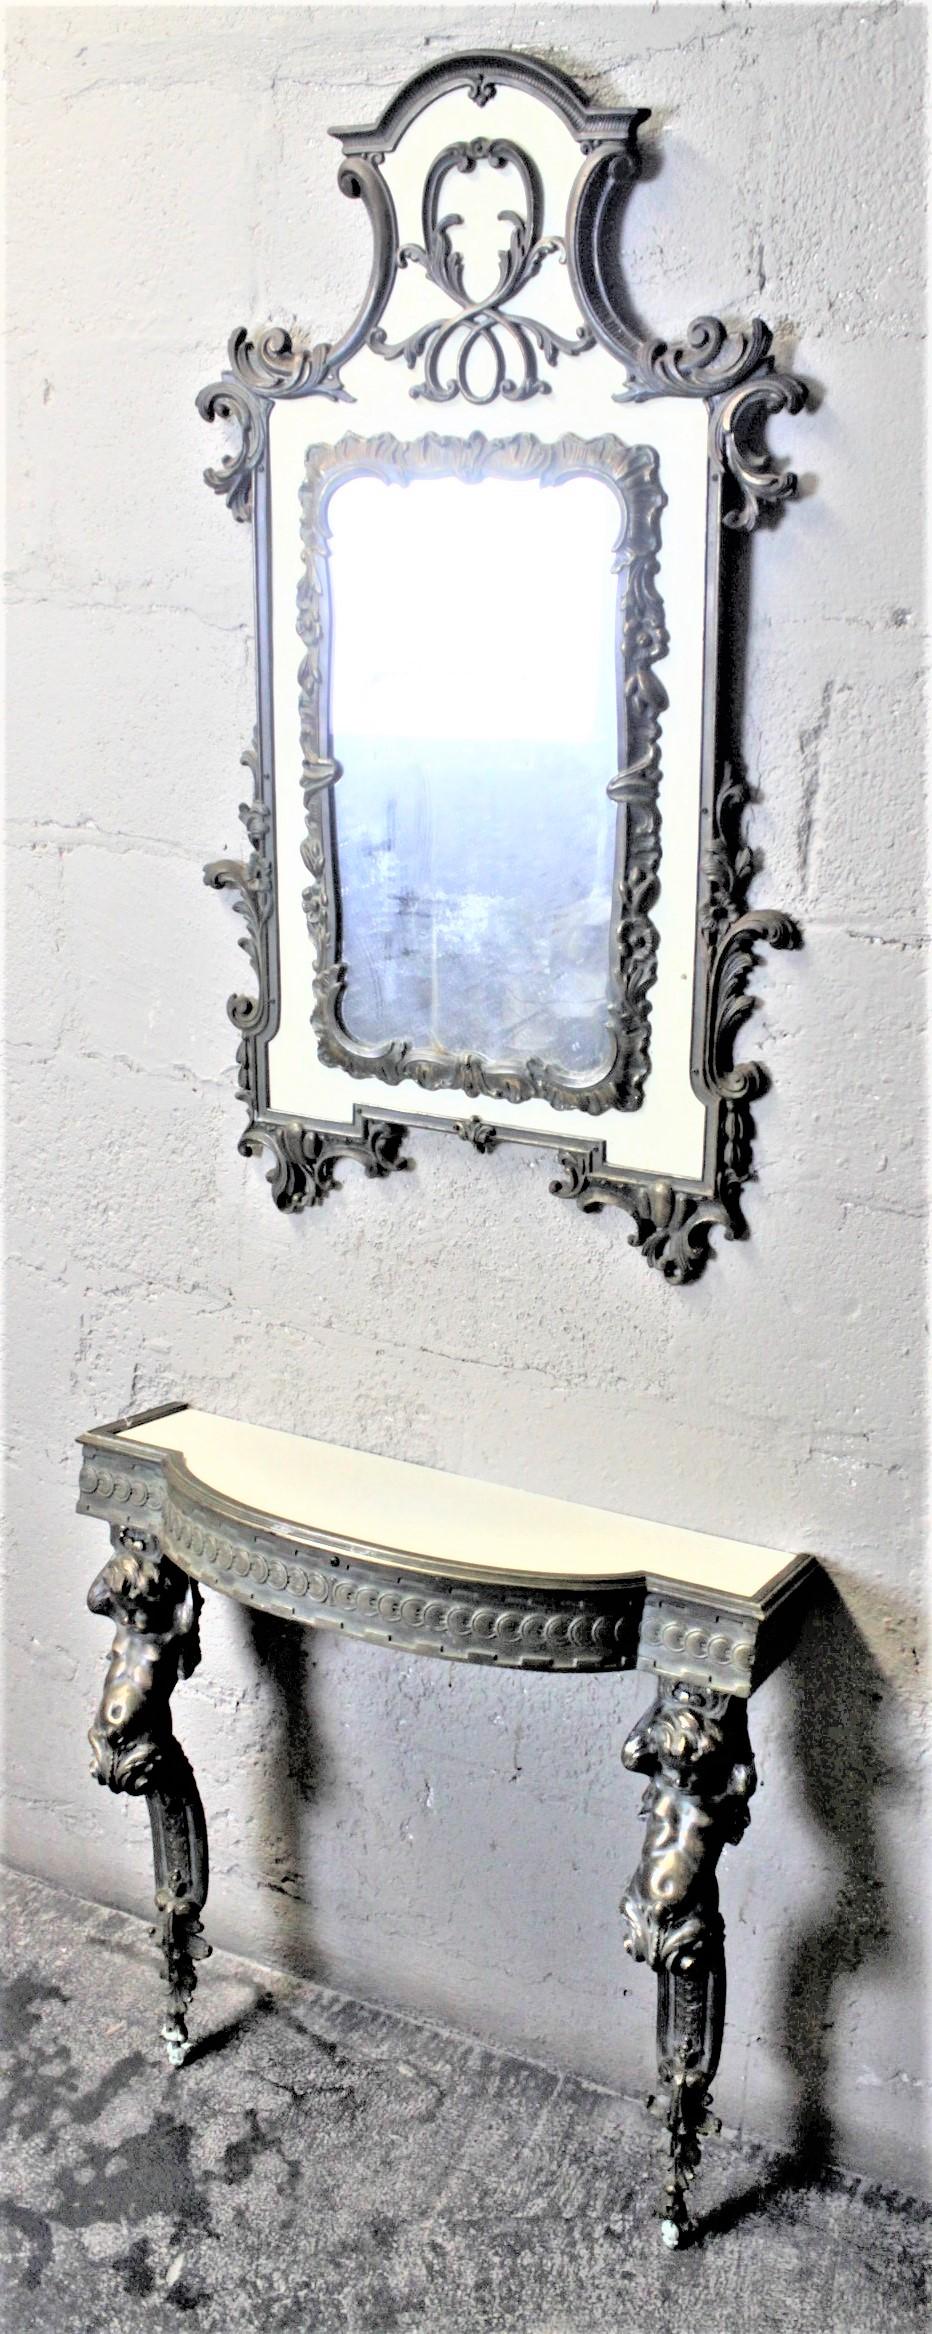 American French Renaissance Revival Styled Console Table & Mirror with Brass Cherub Legs For Sale